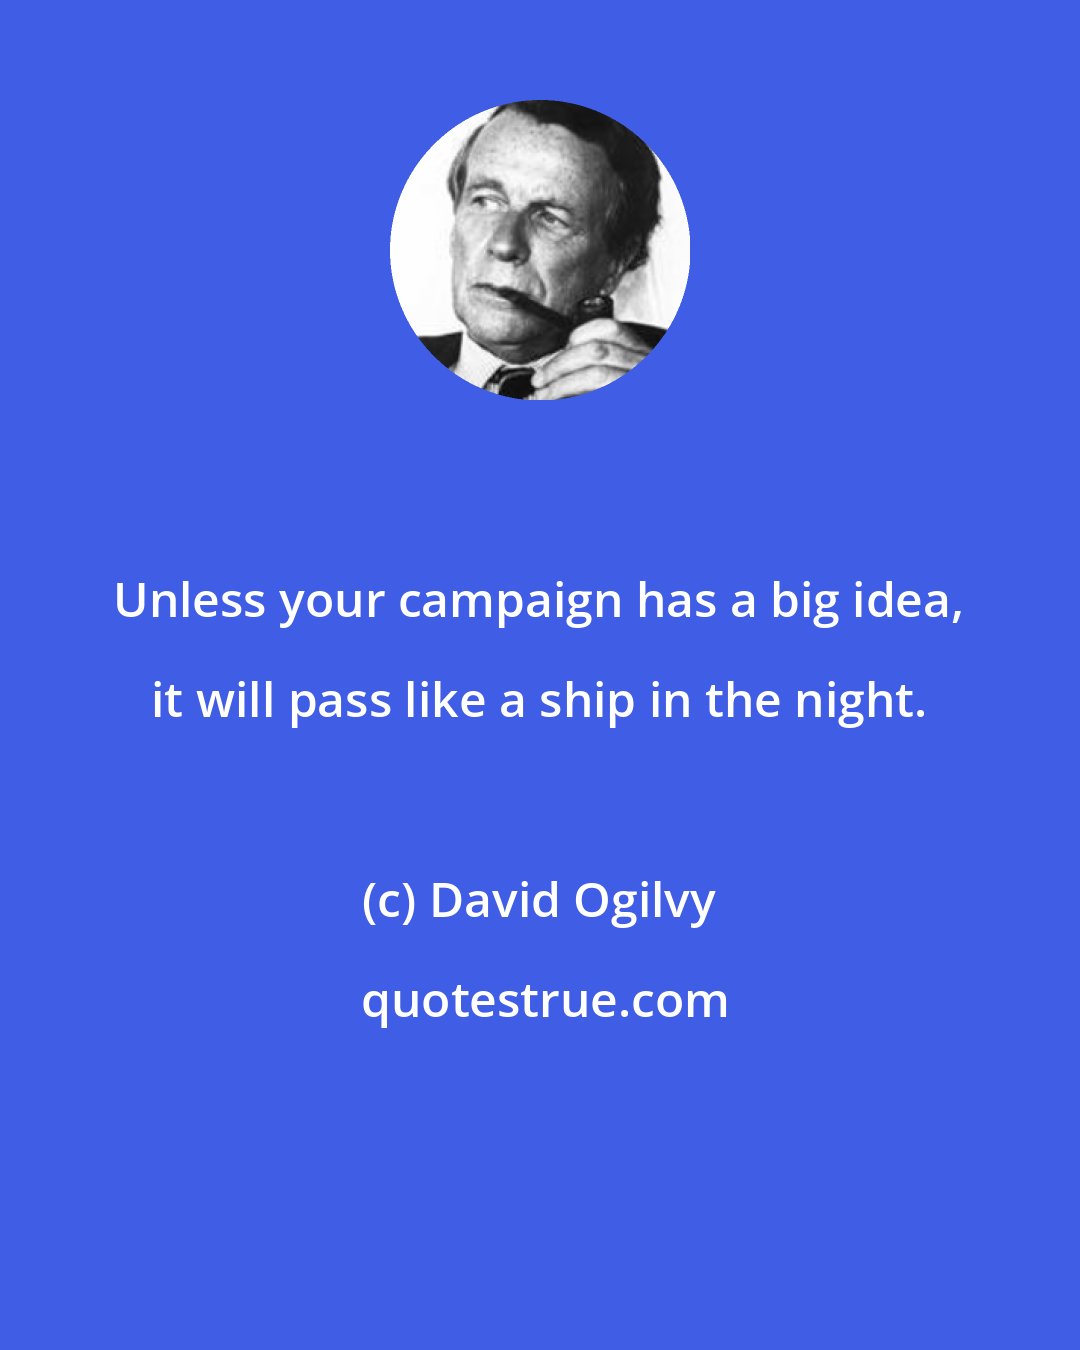 David Ogilvy: Unless your campaign has a big idea, it will pass like a ship in the night.